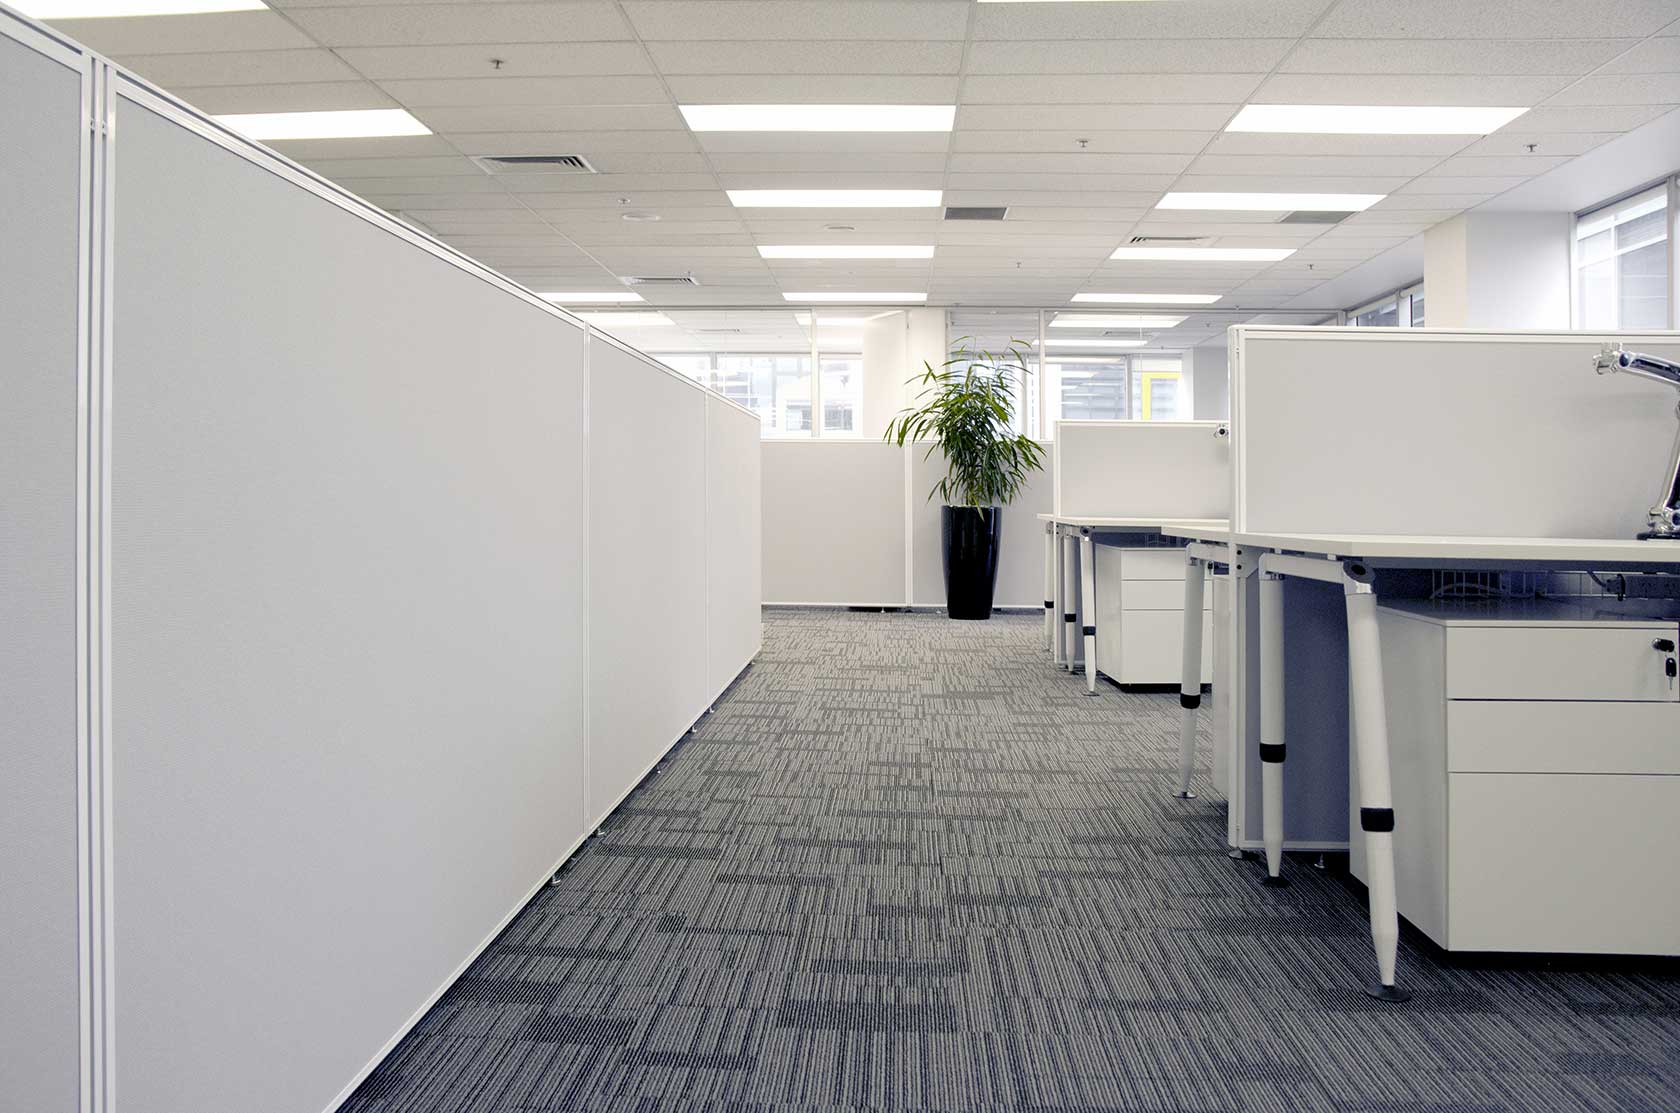 10 Benefits Of Installing Carpet Tiles At Your Office